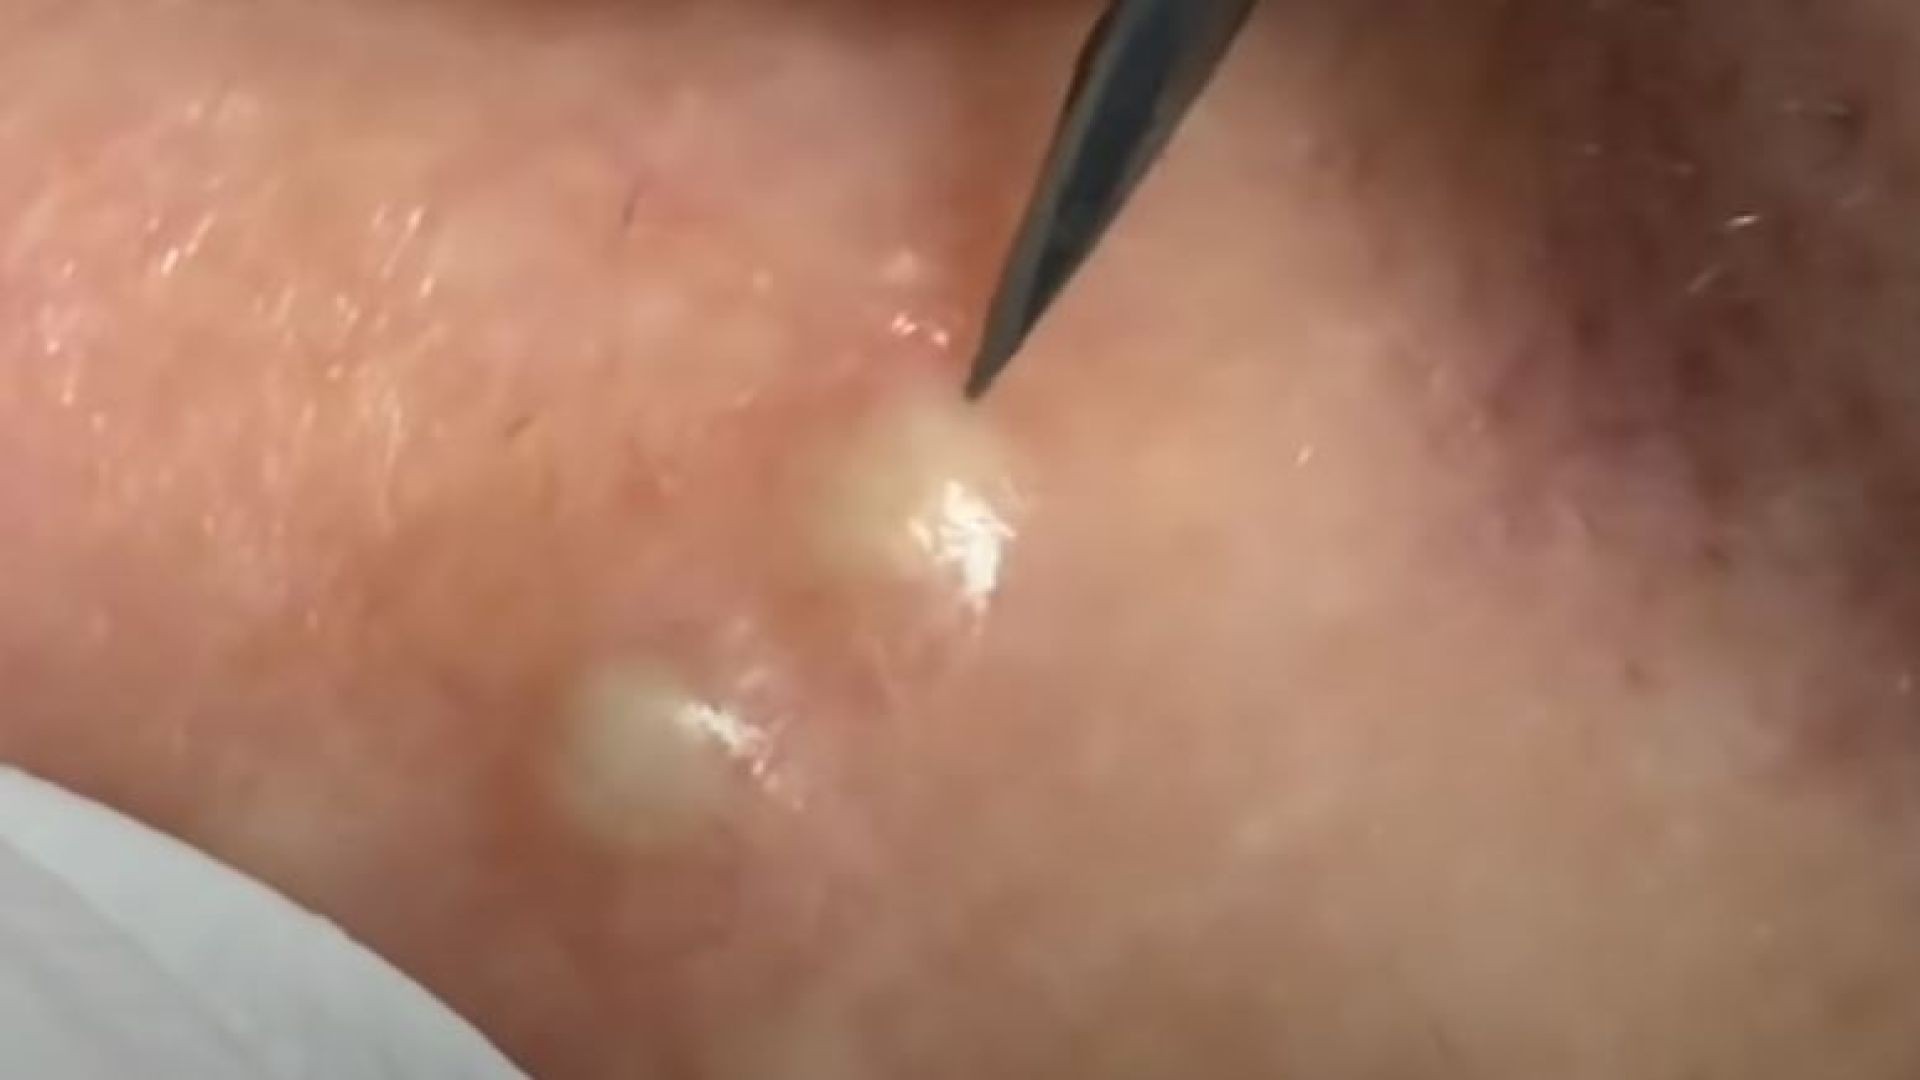 Pimple popping removal